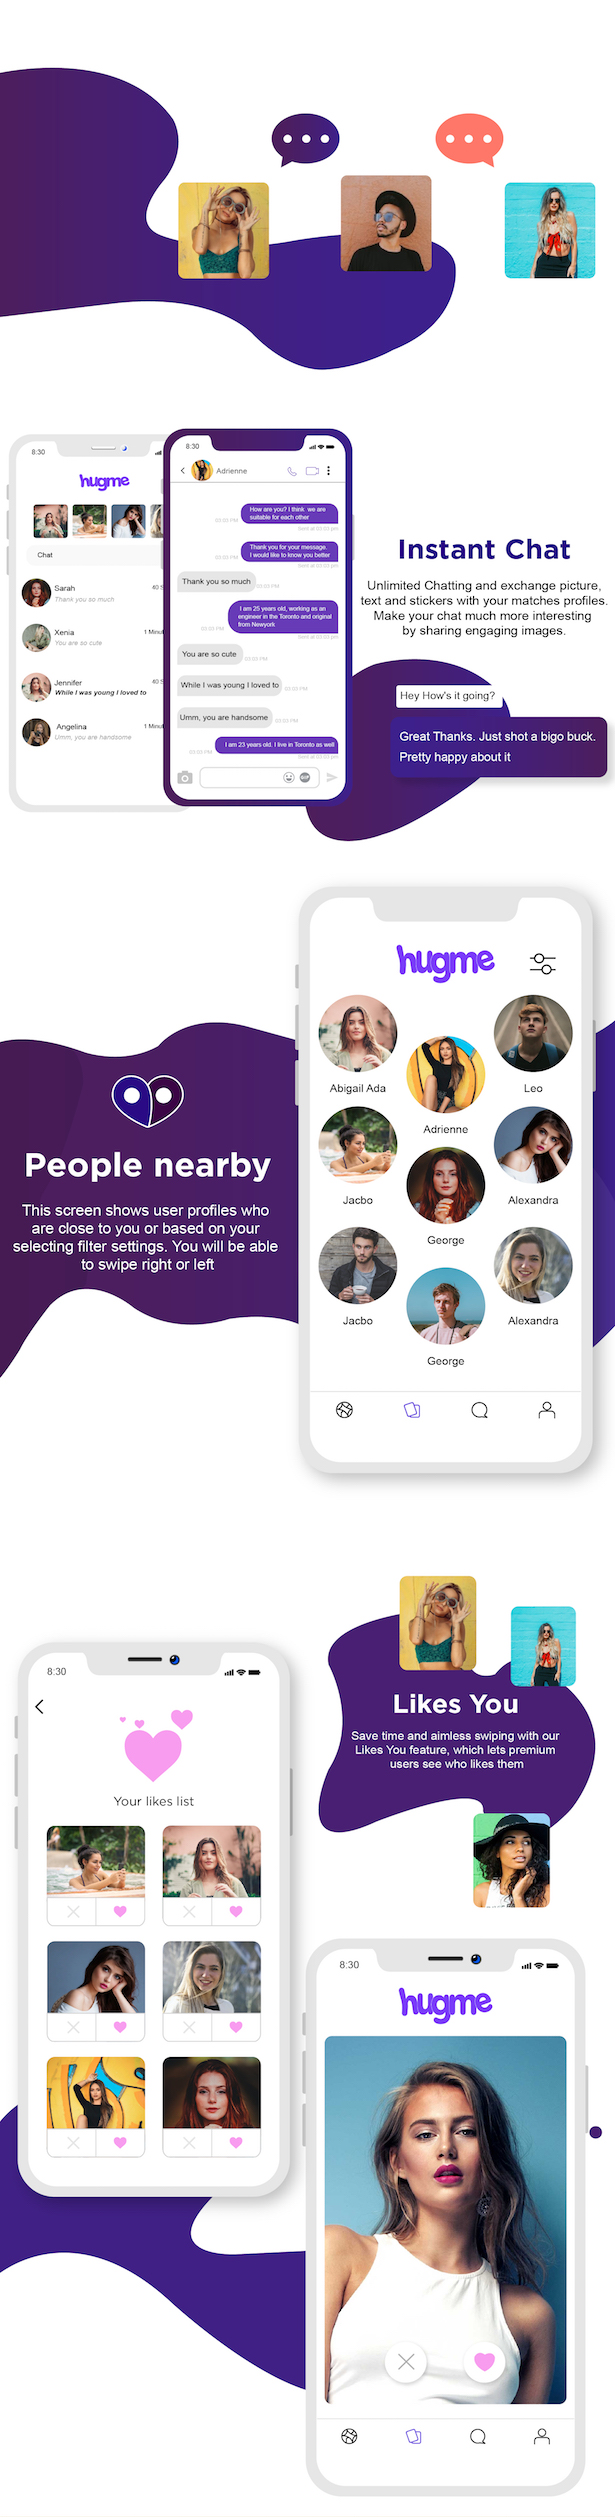 Hugme - Android Native Dating App with Audio Video Calls and Live Streaming - 7